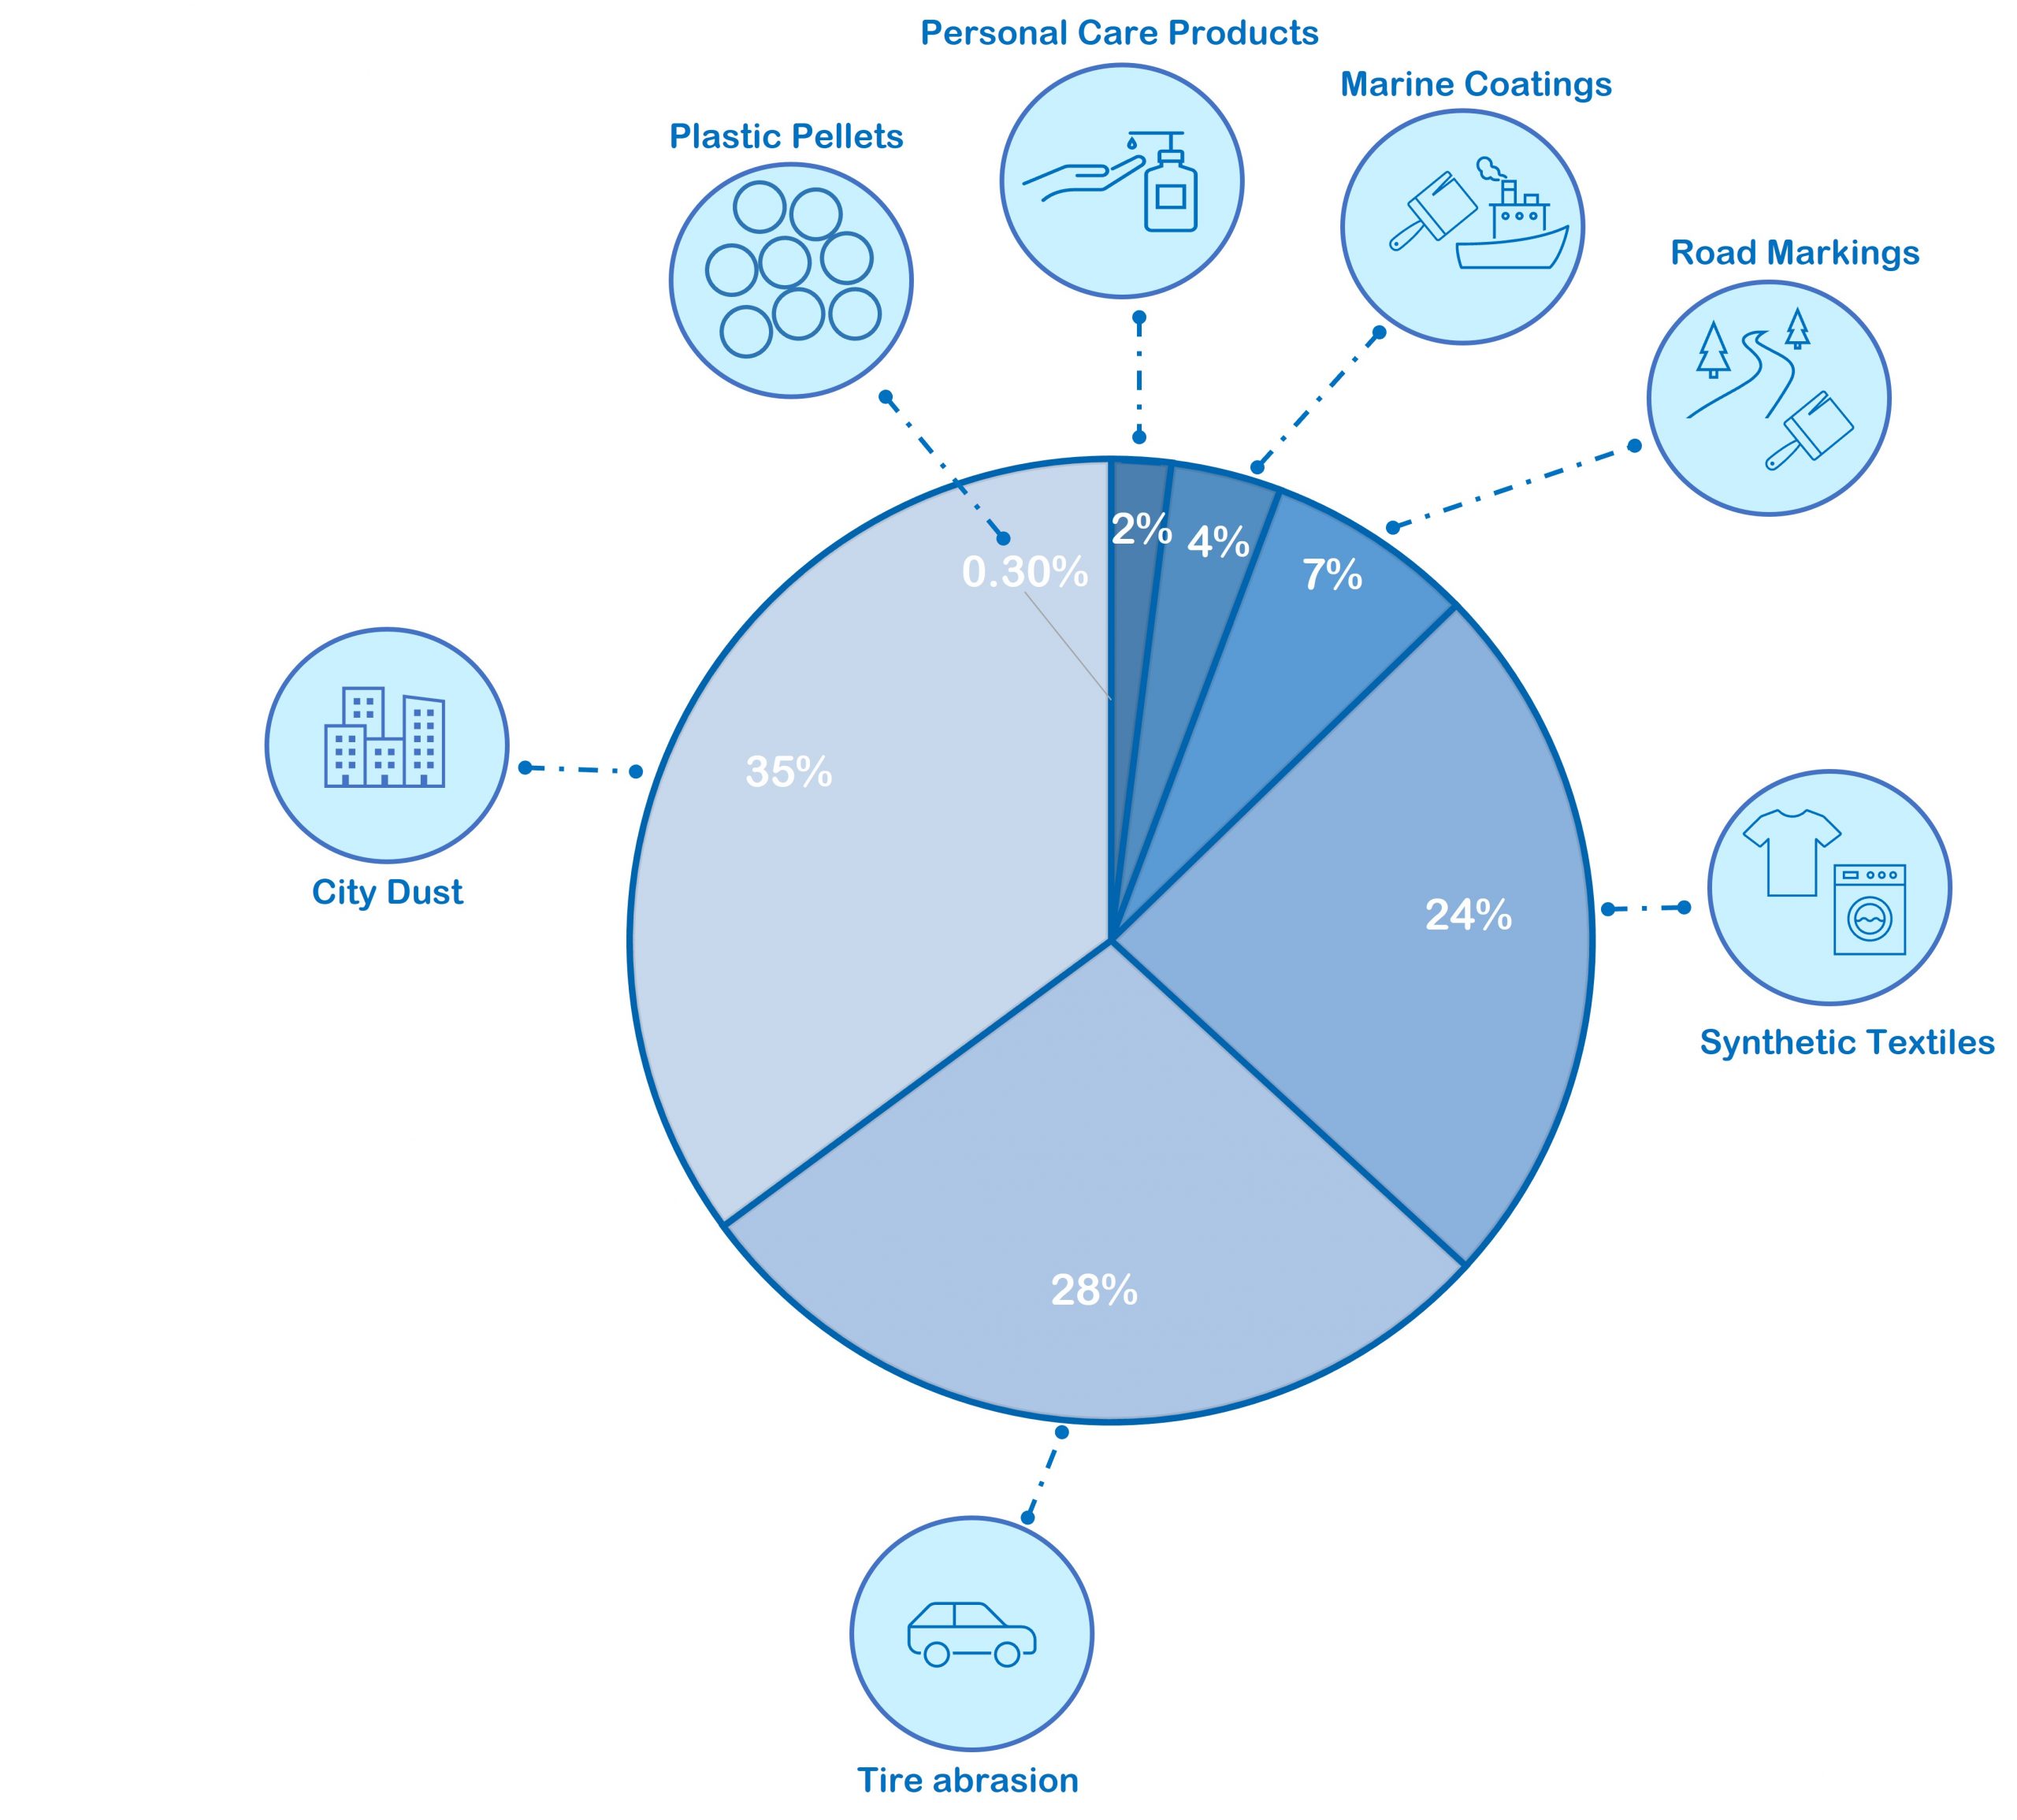 Global sources of primary microplastics to the world oceans (Adapted from IUCN, “Primary Microplastics in the Oceans: a Global Evaluation of Sources”).